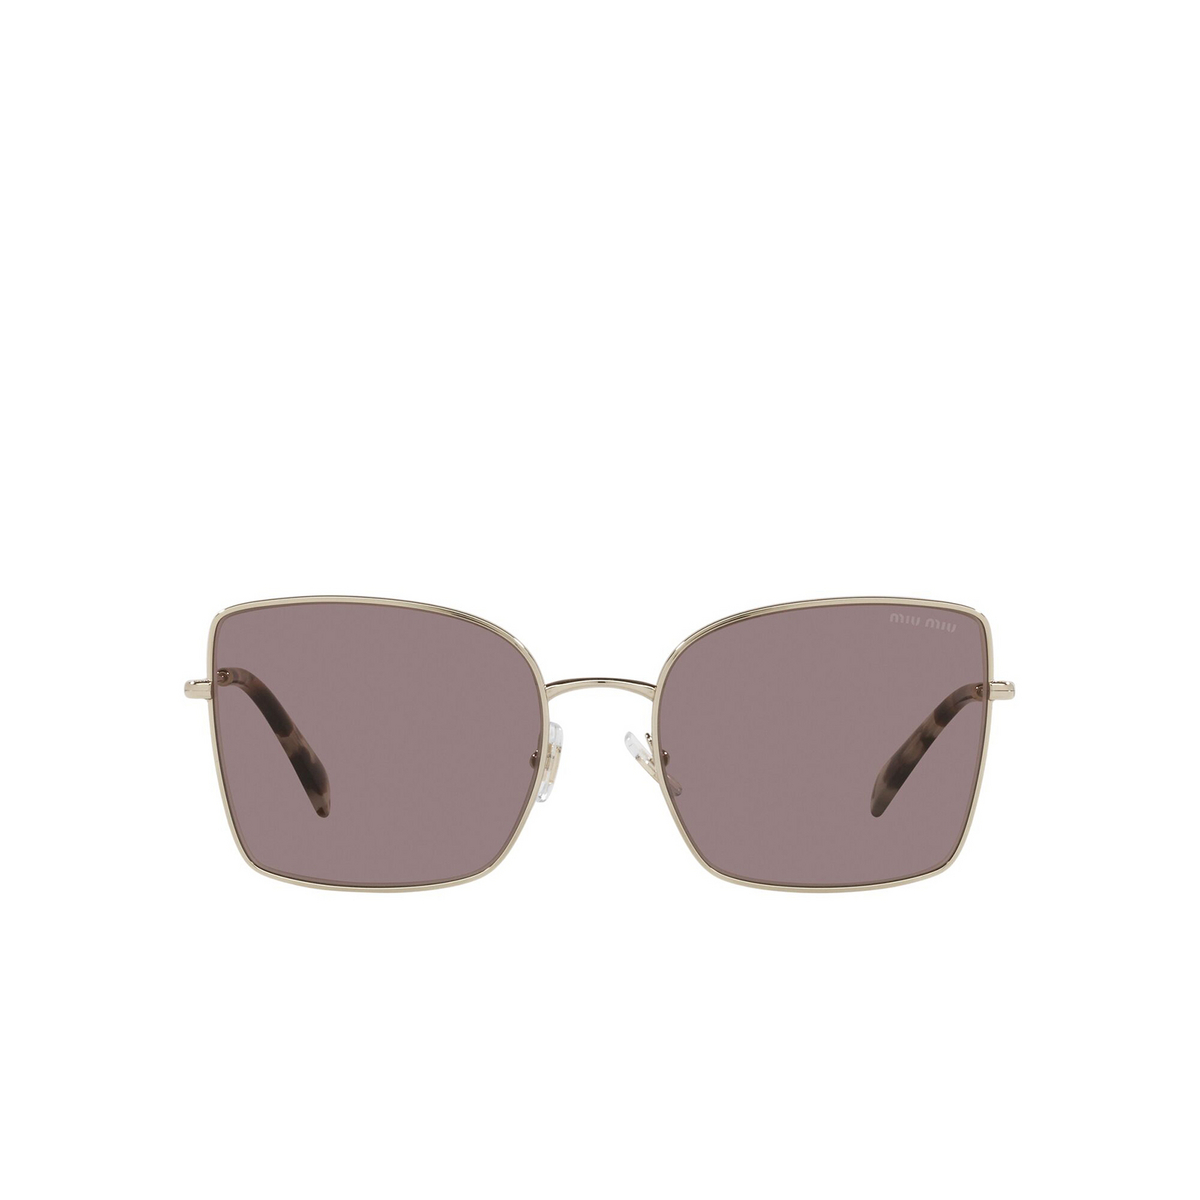 Miu Miu® Butterfly Sunglasses: MU 51WS color Pale Gold ZVN05P - front view.